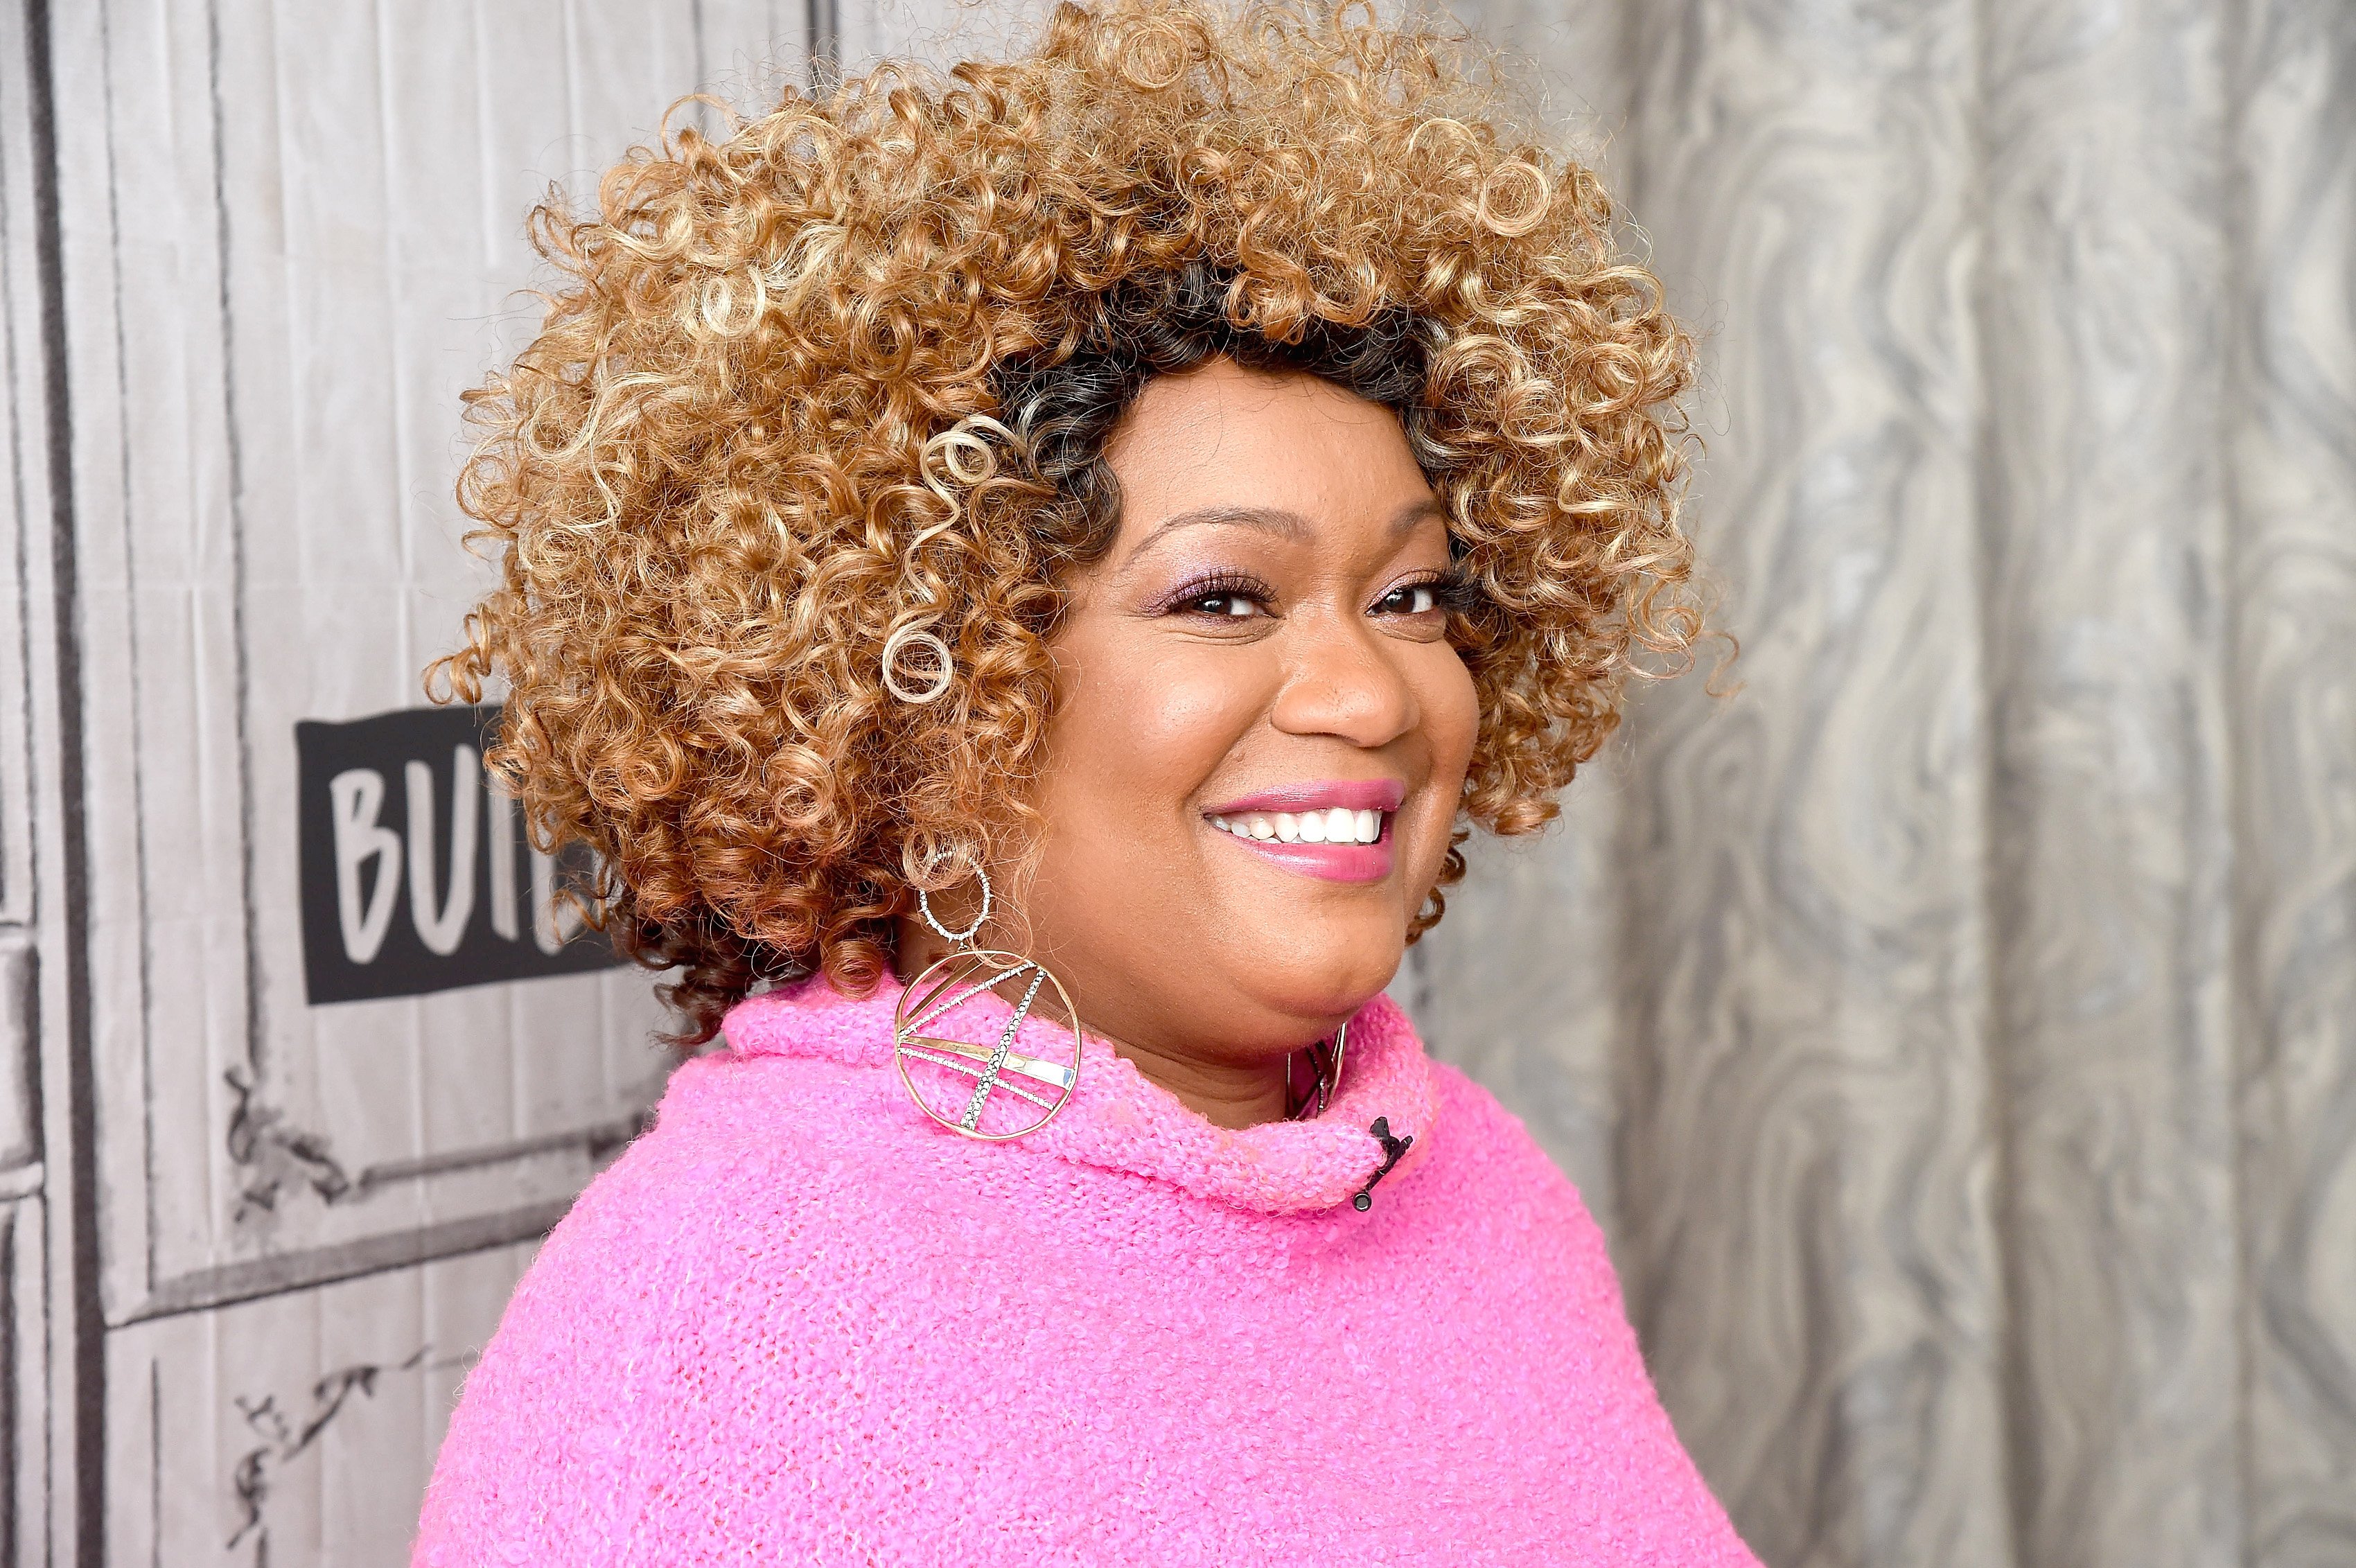 Food Network personality Sunny Anderson is photographed wearing a long-sleeved pink blouse.